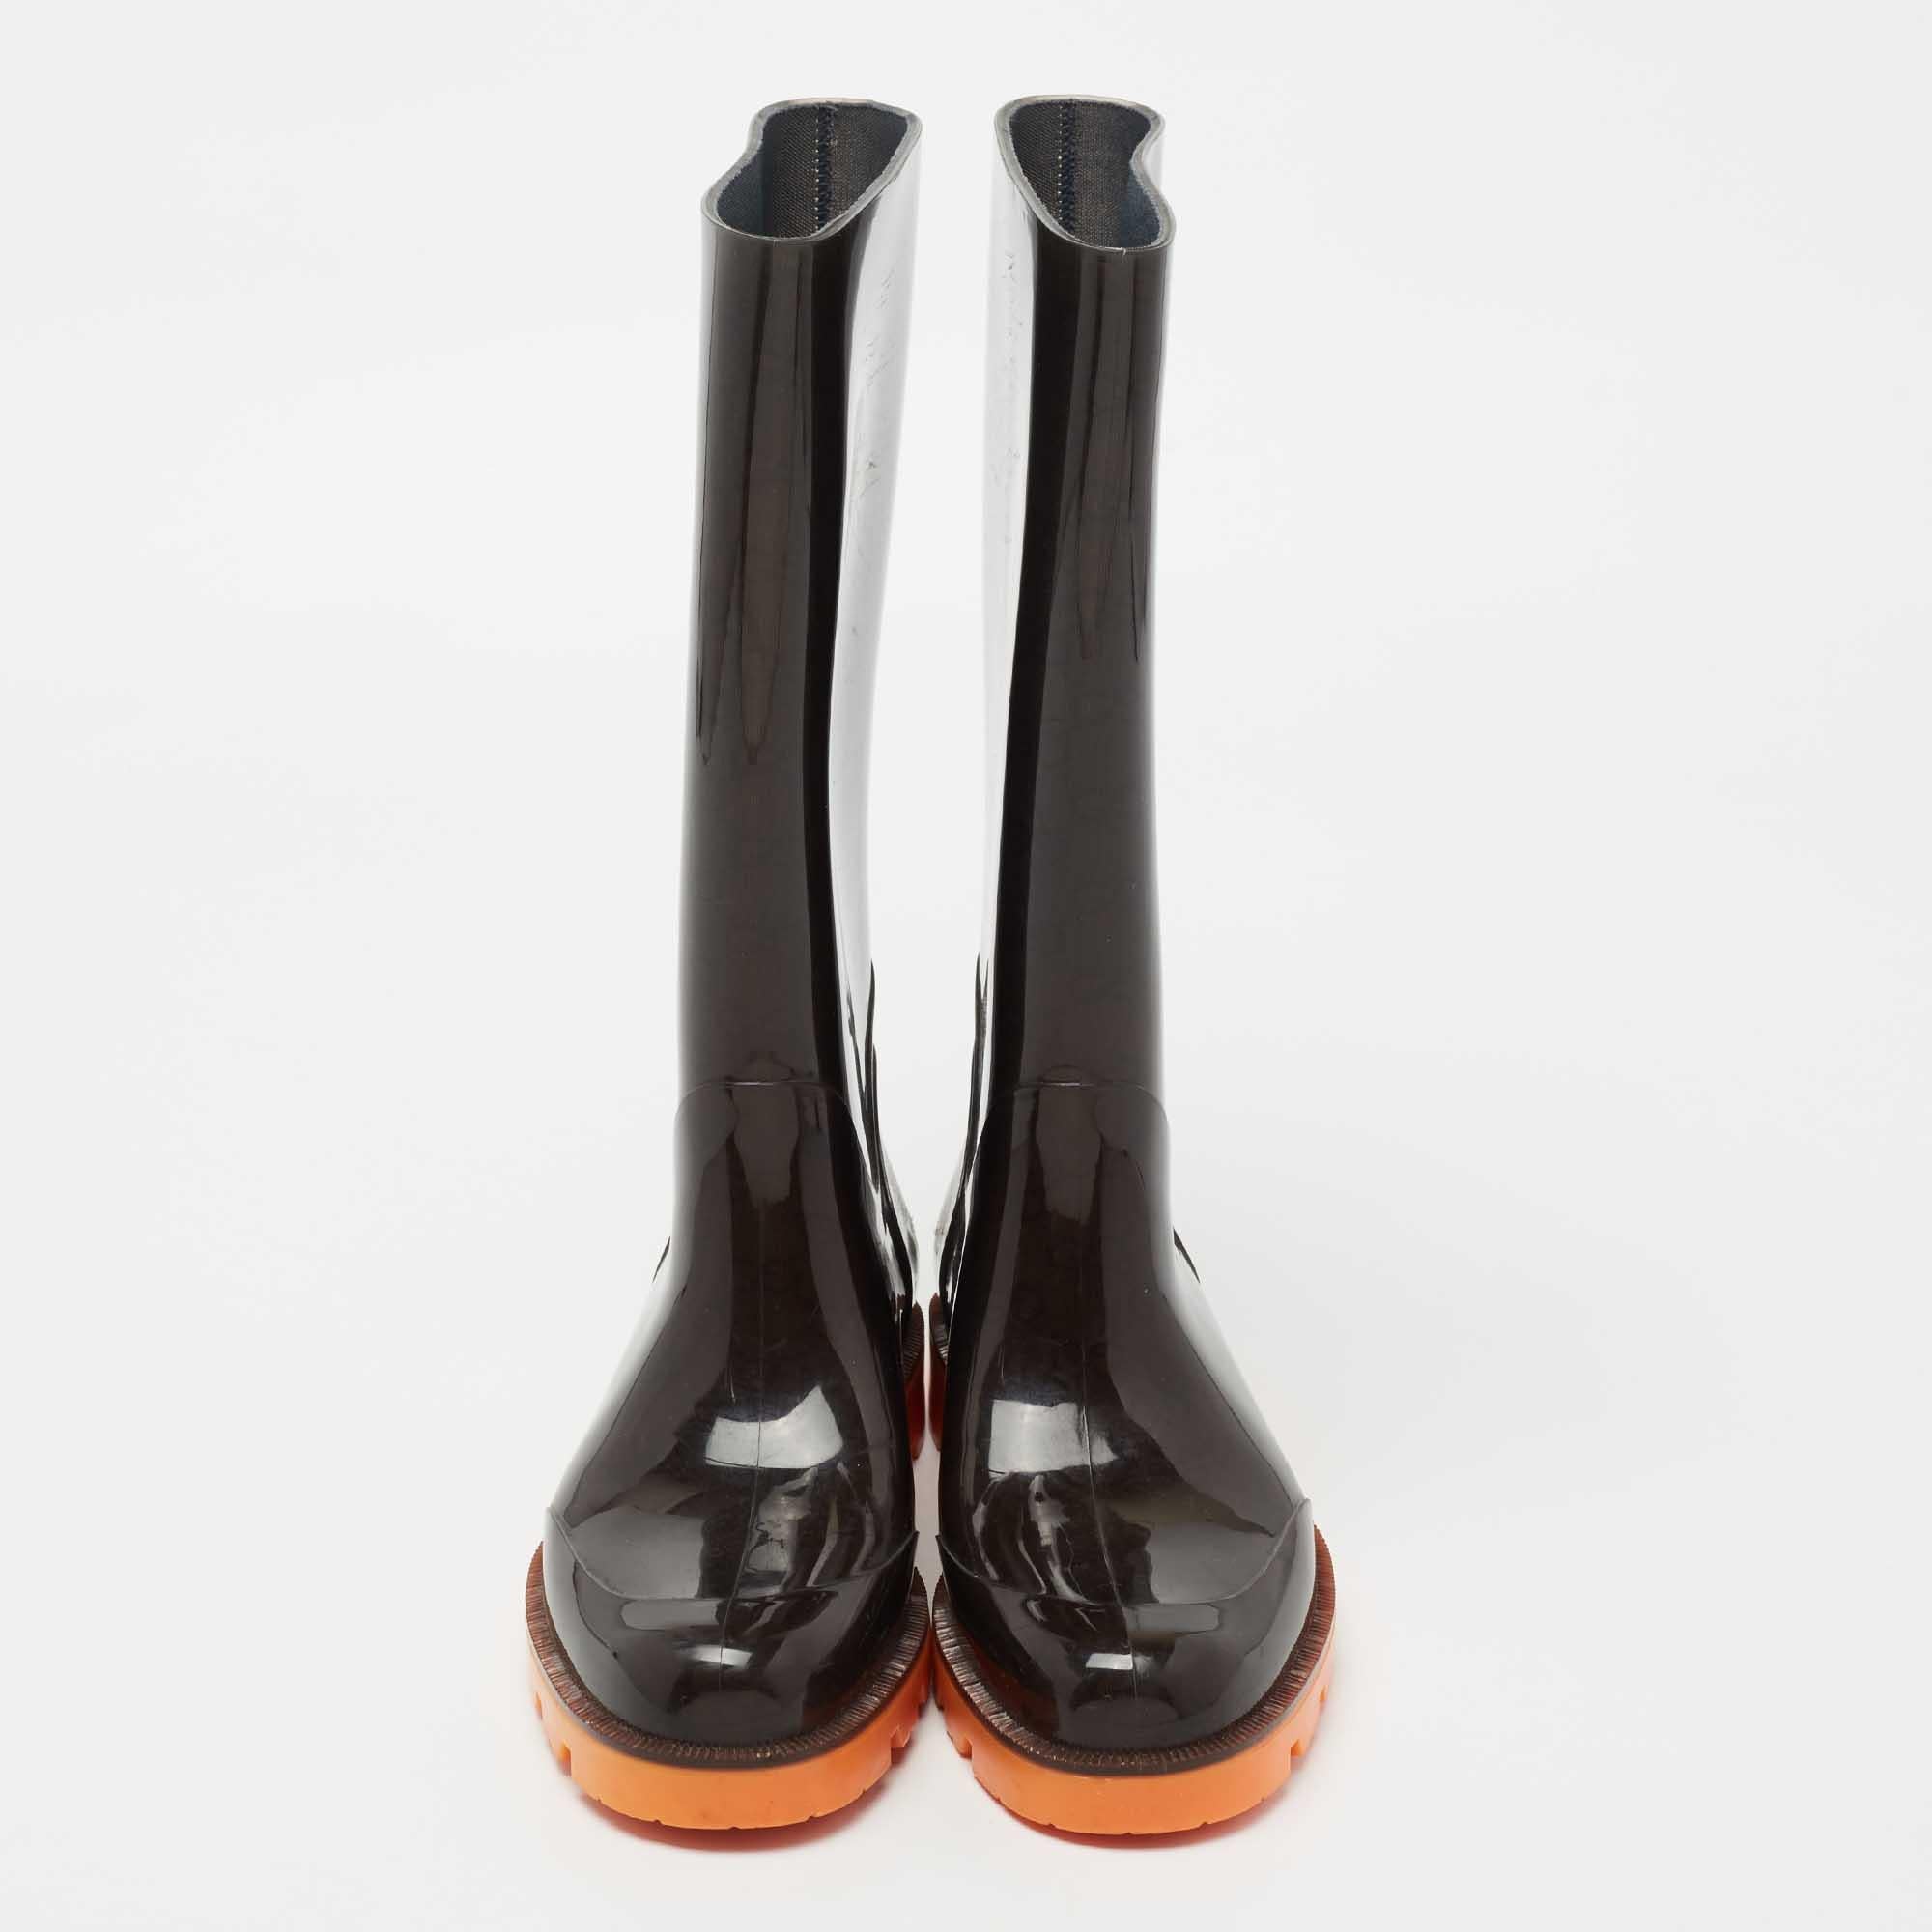 These Gucci rain boots are extremely well crafted and stylish. They have a black rubber exterior and a simple design with rounded toes, smooth insoles, and durable rubber soles.

Includes: Original Dustbag